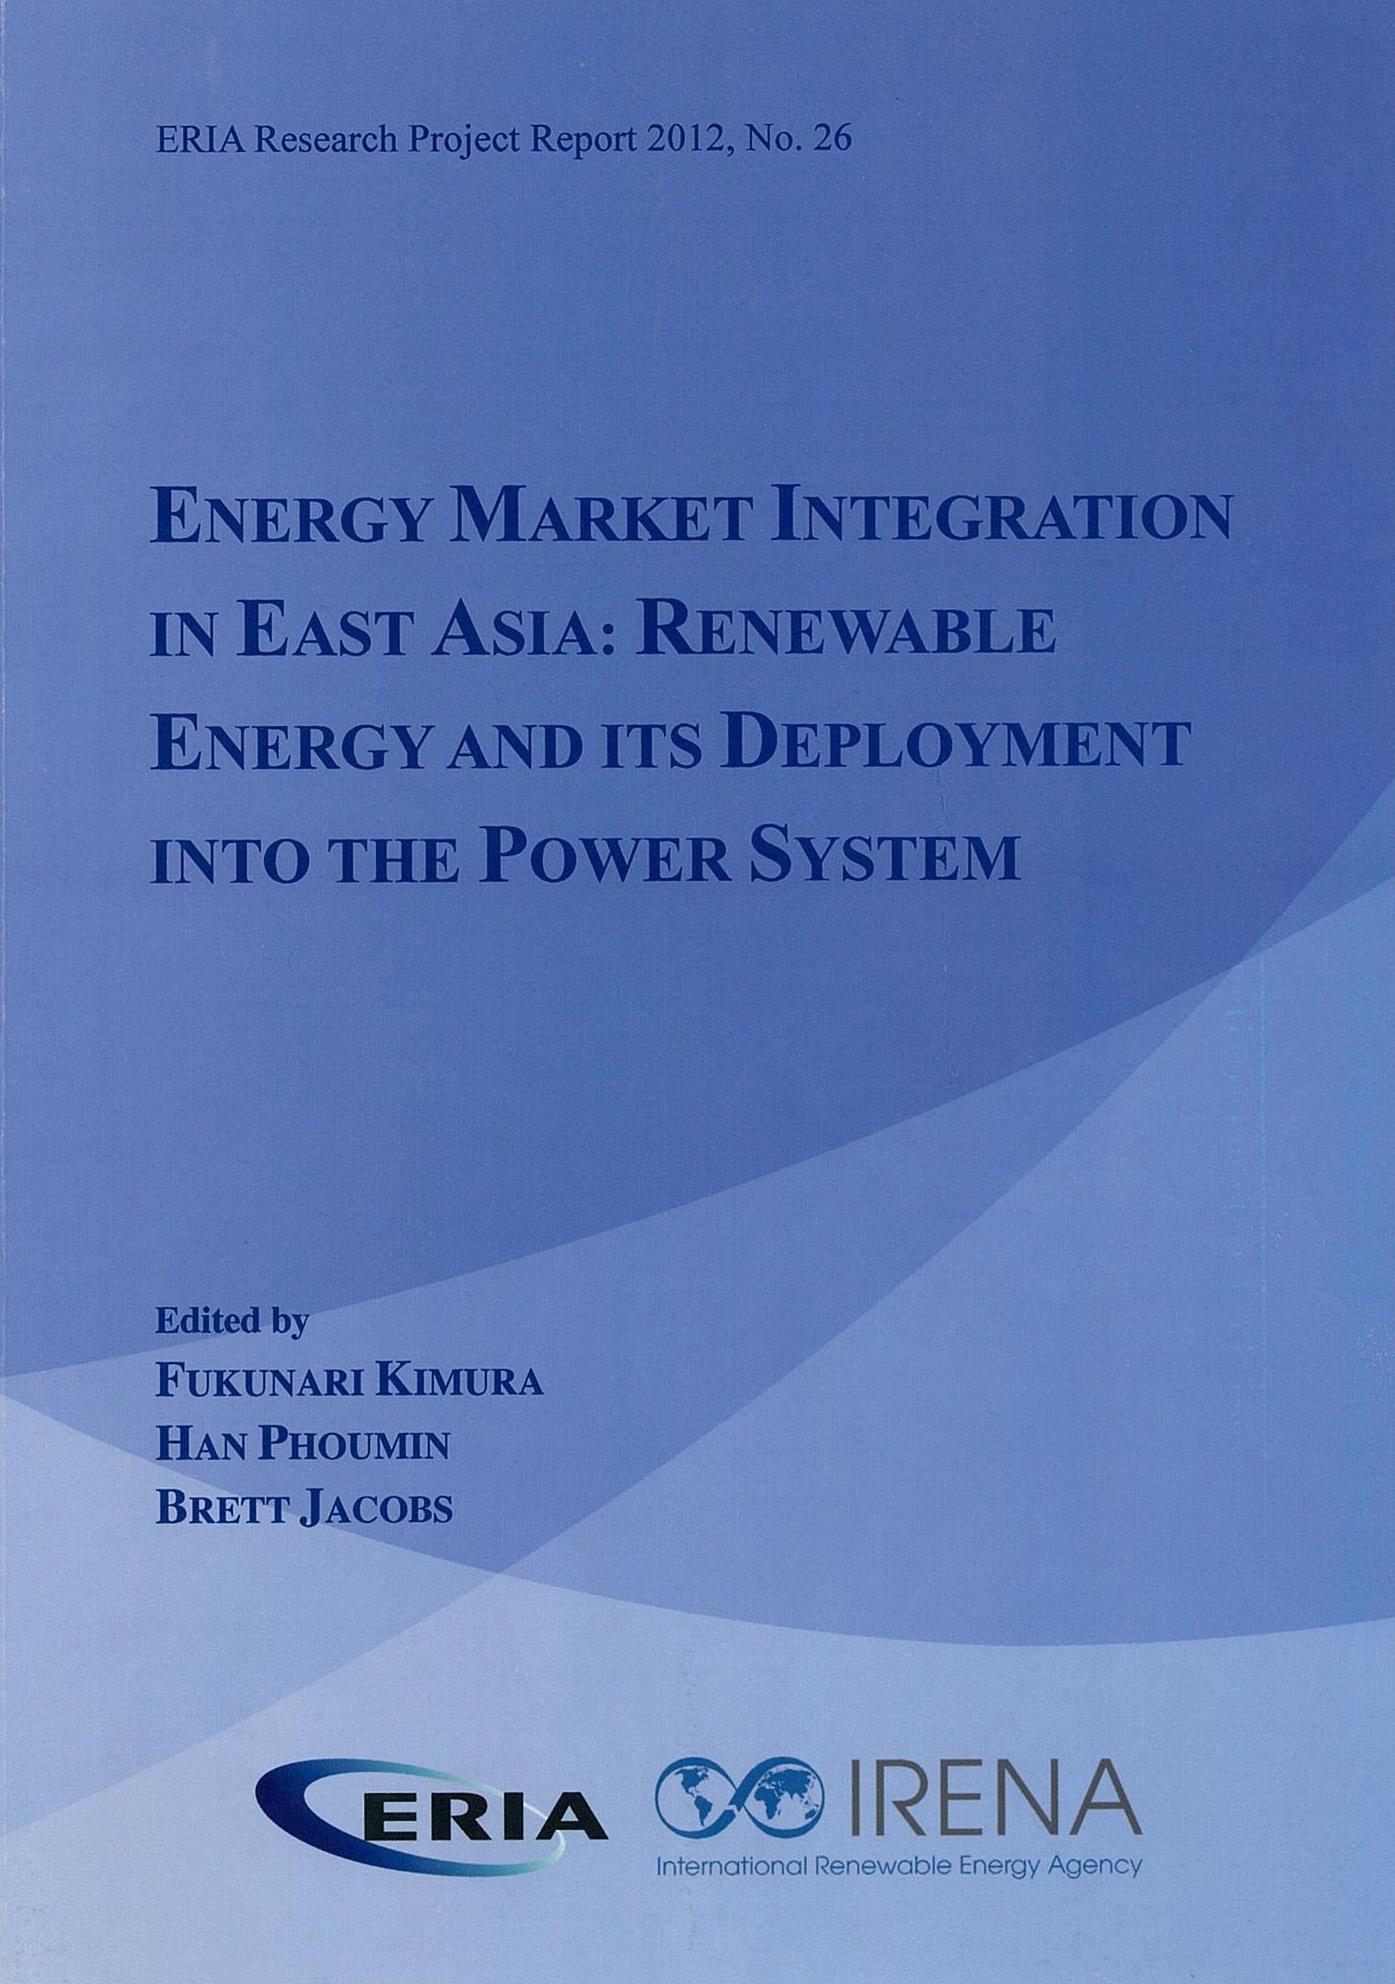 Energy Market Integration in East Asia: Renewable Energy and its Deployment into the Power System